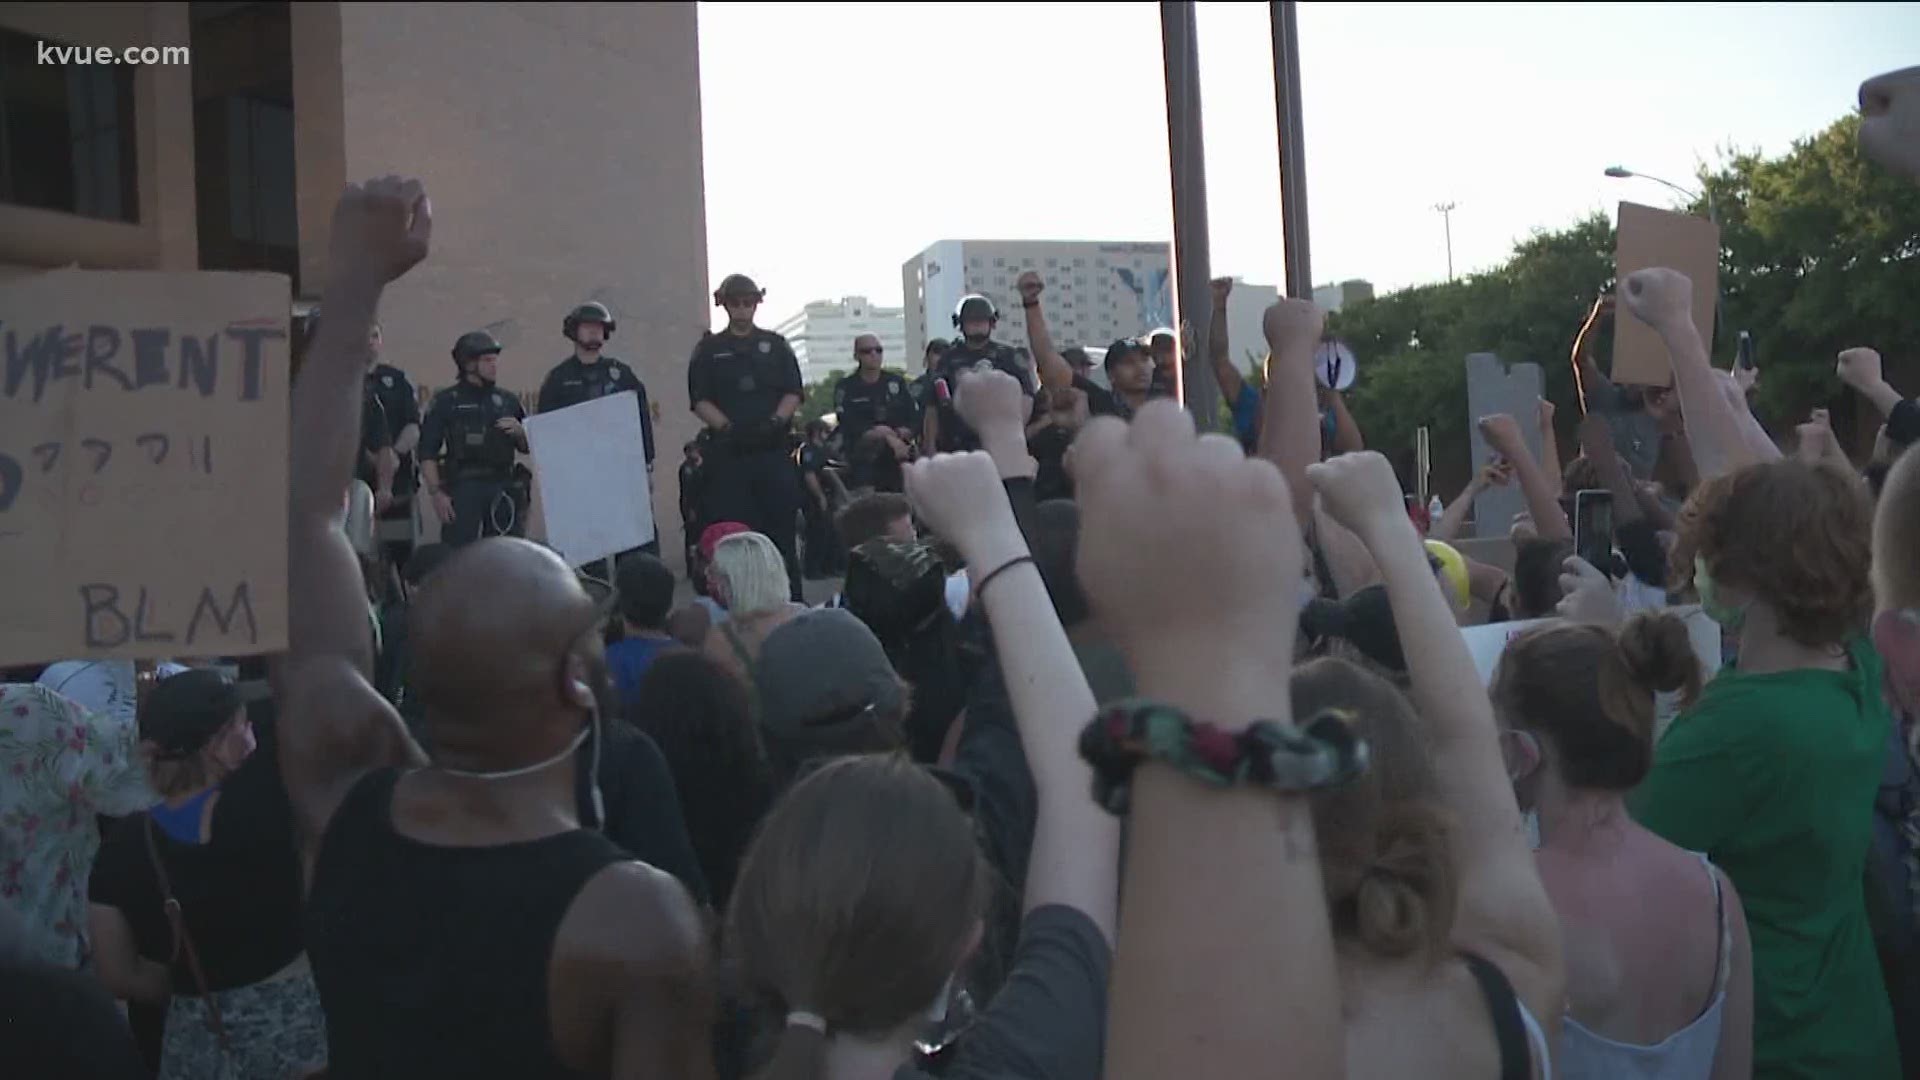 KVUE's Mike Marut gives live updates during the evening hours of Sunday's protest in Austin.